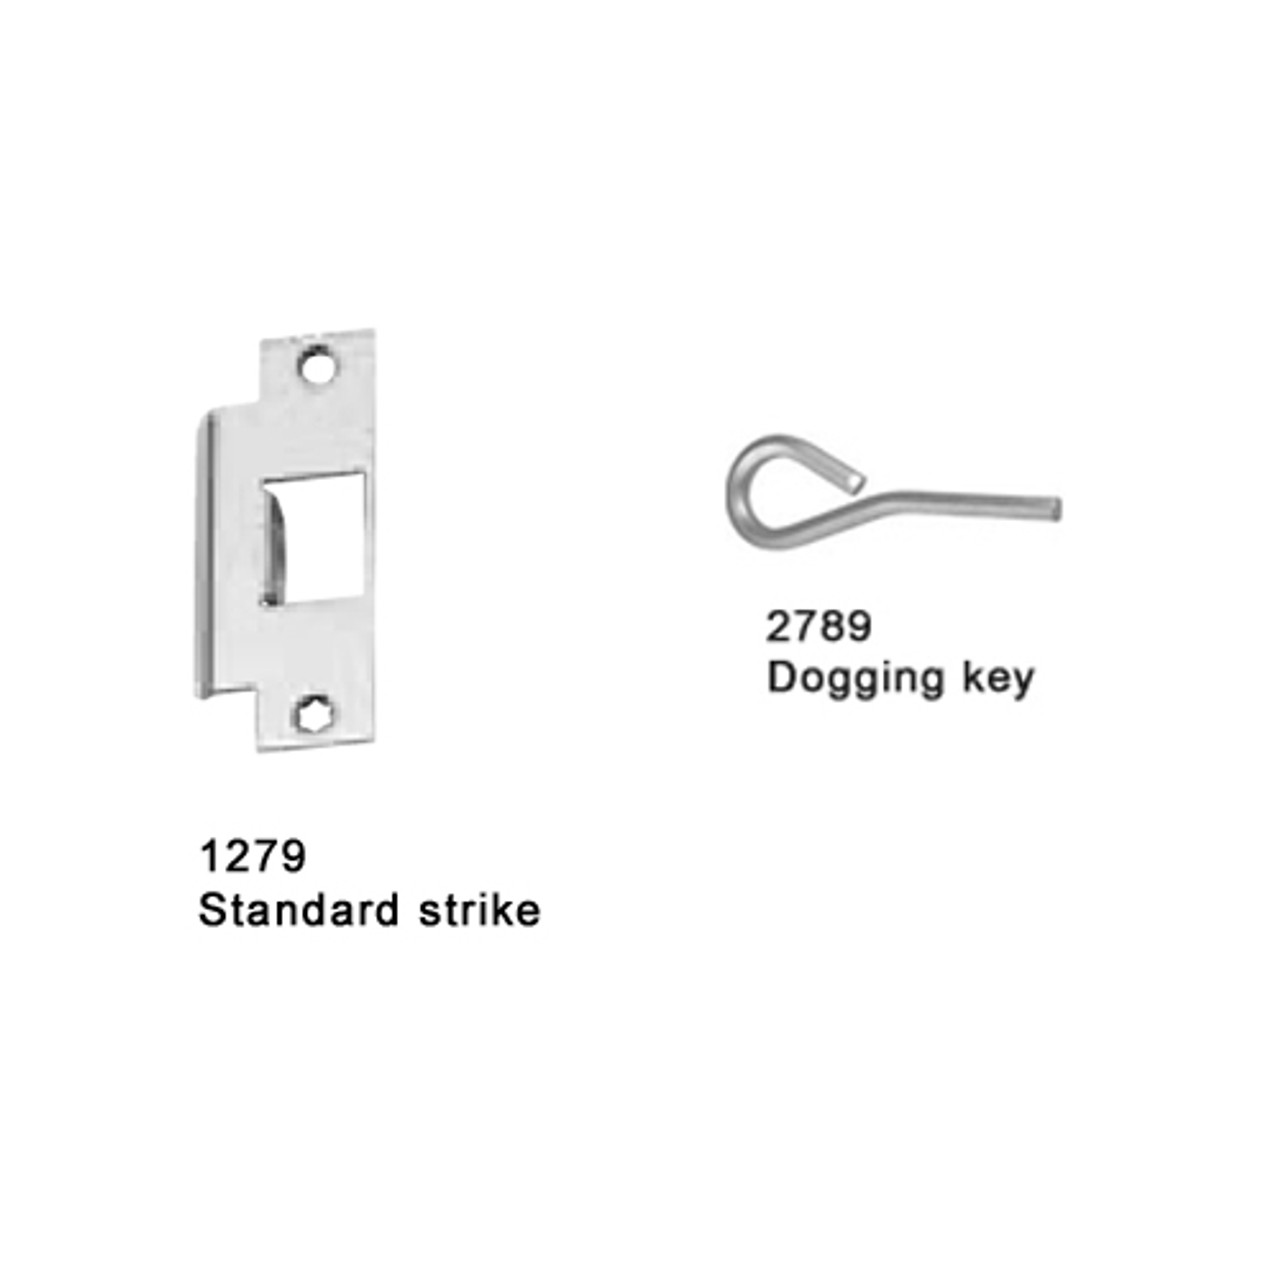 25-M-L-DT-DANE-US32D-3-LHR Falcon 25 Series Mortise Lock Devices 510L-DT Dane Lever Trim with Dummy Trim in Satin Stainless Steel